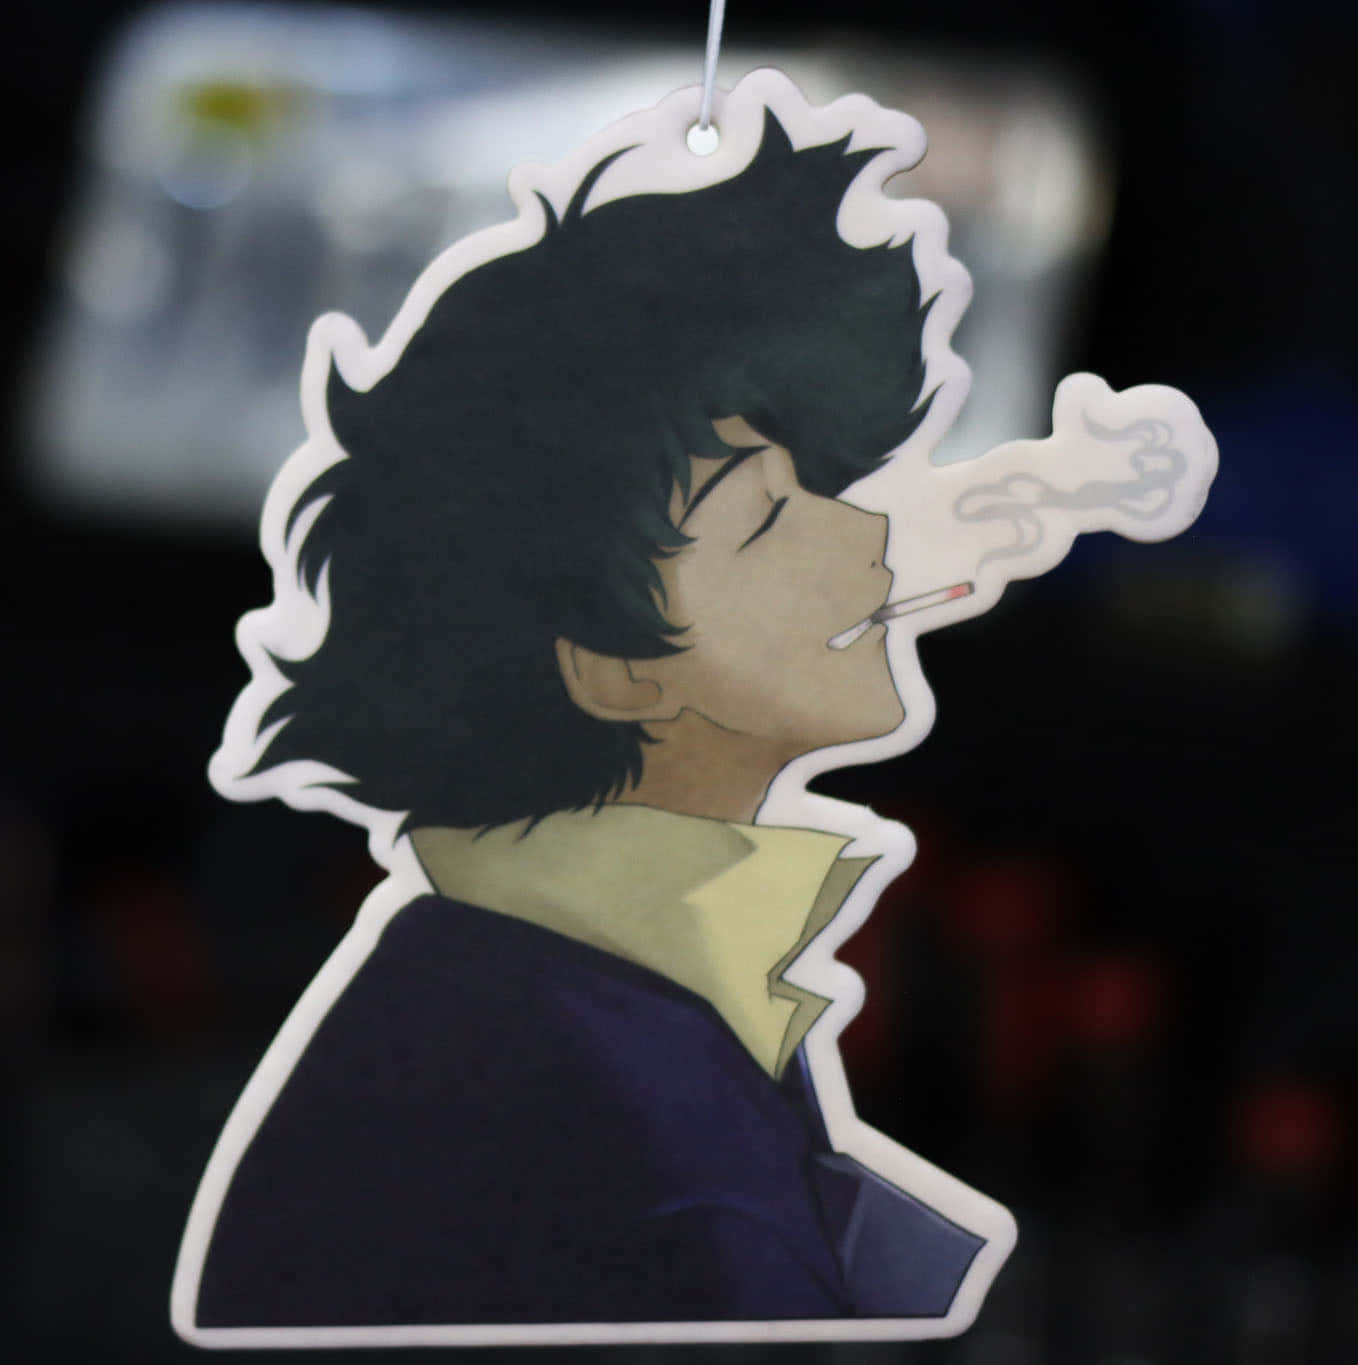 Cool and Collected - Spike Spiegel of Cowboy Bebop Wallpaper